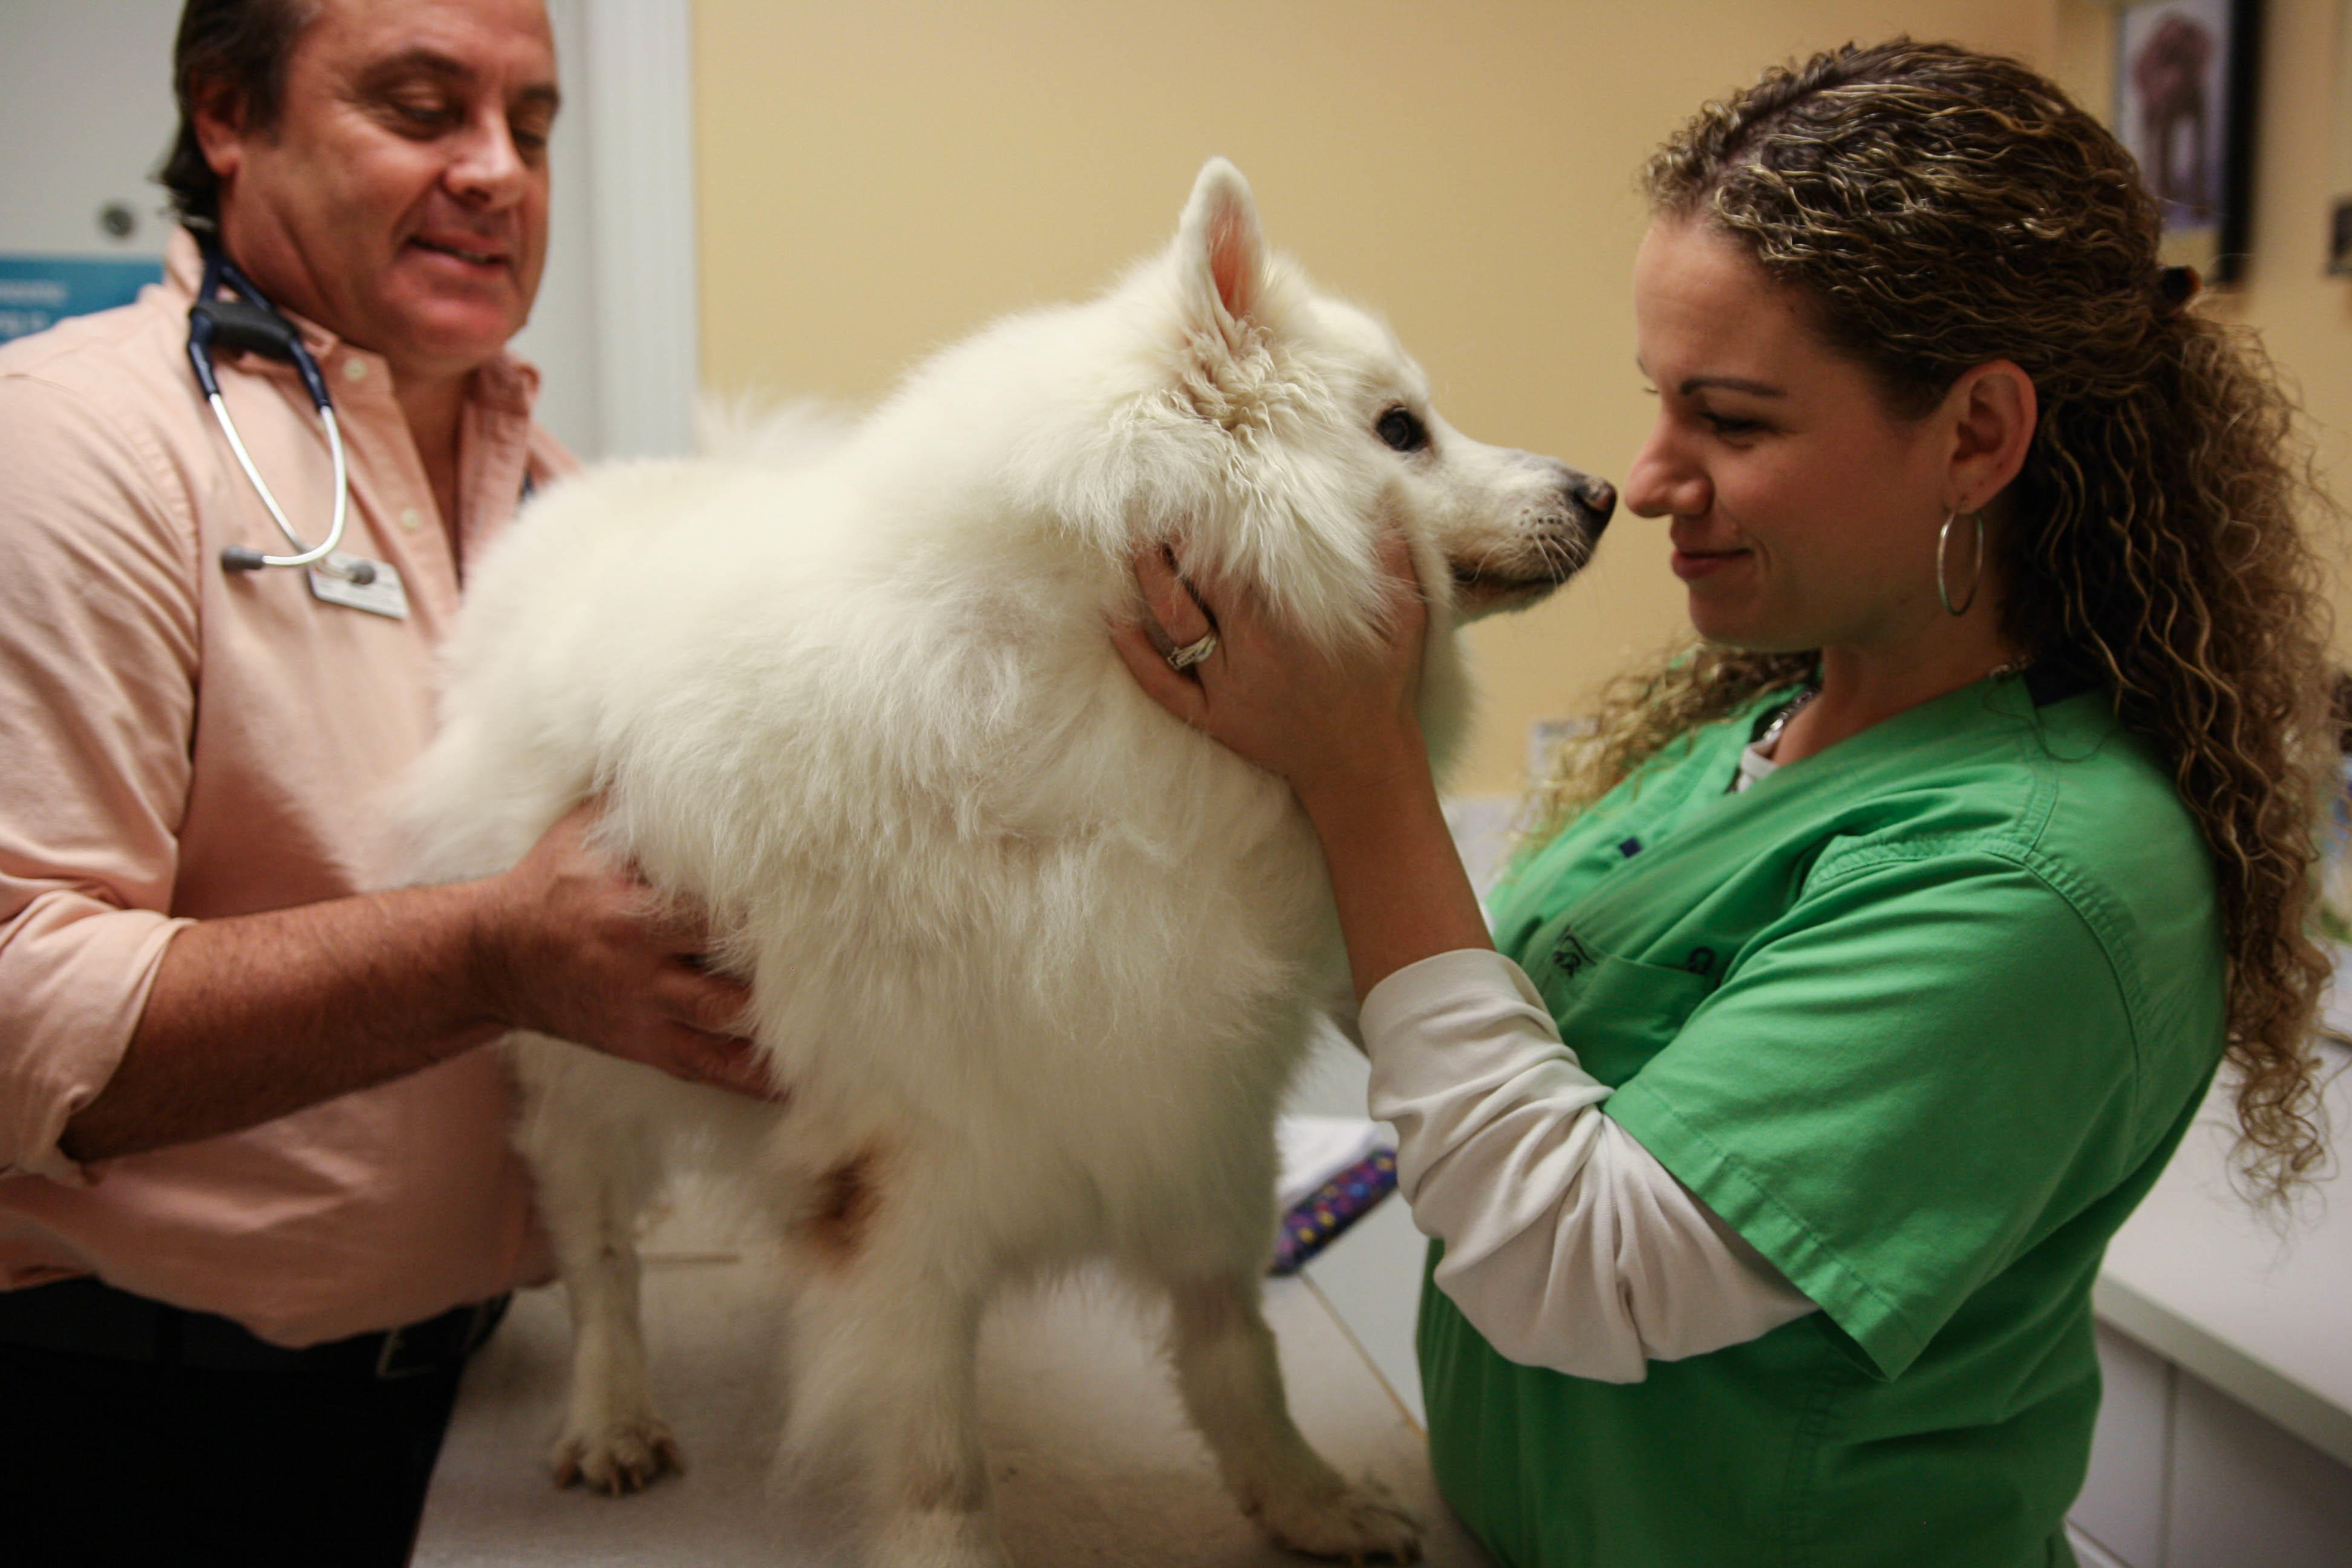 Here, Dr. Krawitz is palpating a fluffy patient’s abdomen to check for tenderness, weight, and body status.